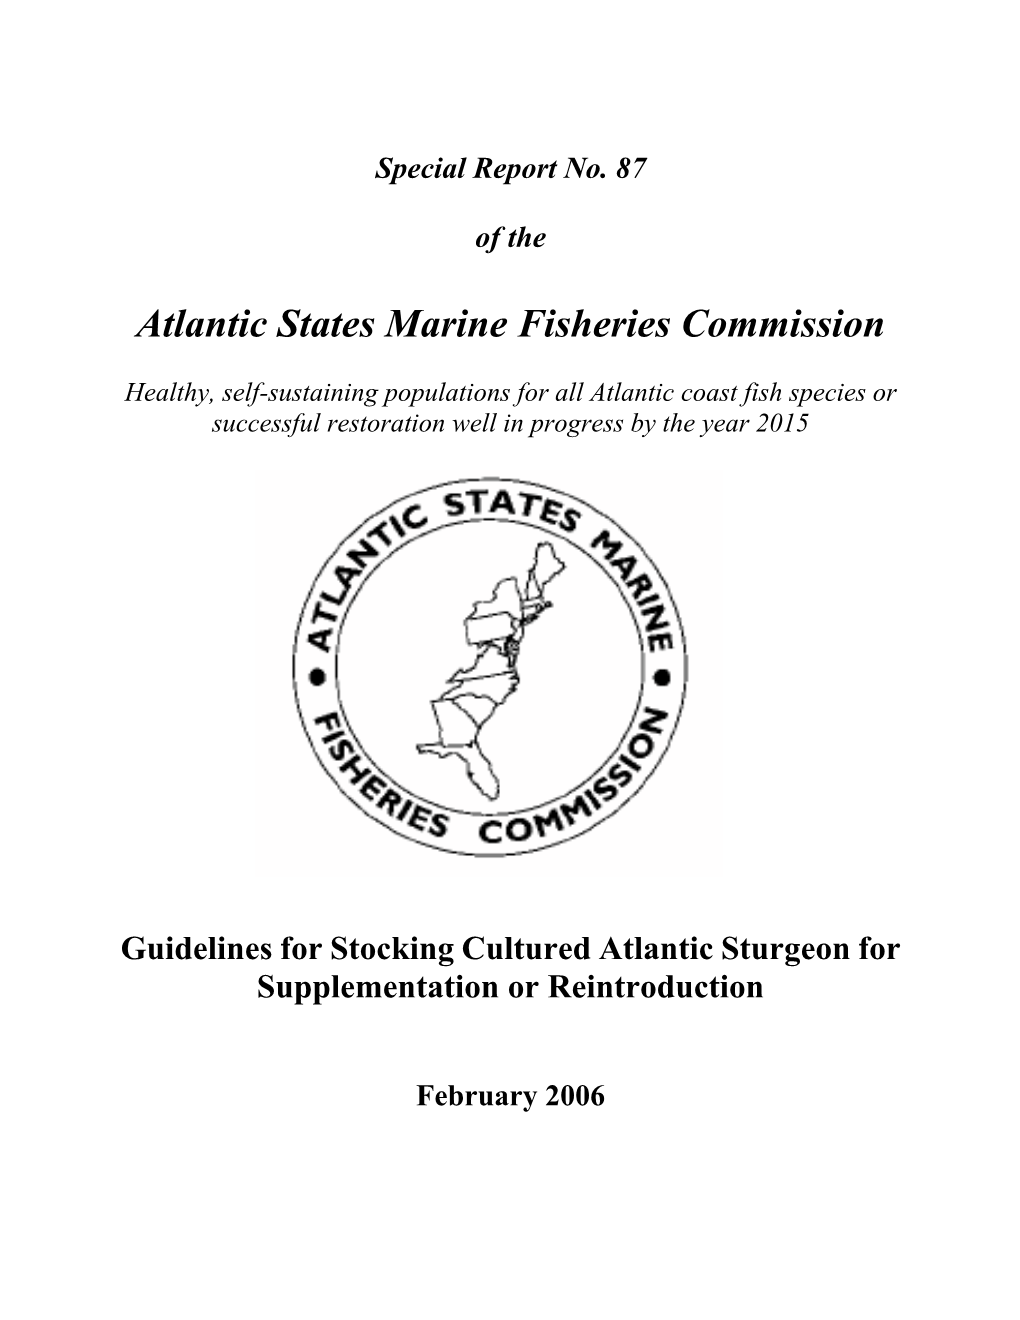 Guidelines for Stocking Cultured Atlantic Sturgeon for Supplementation Or Reintroduction